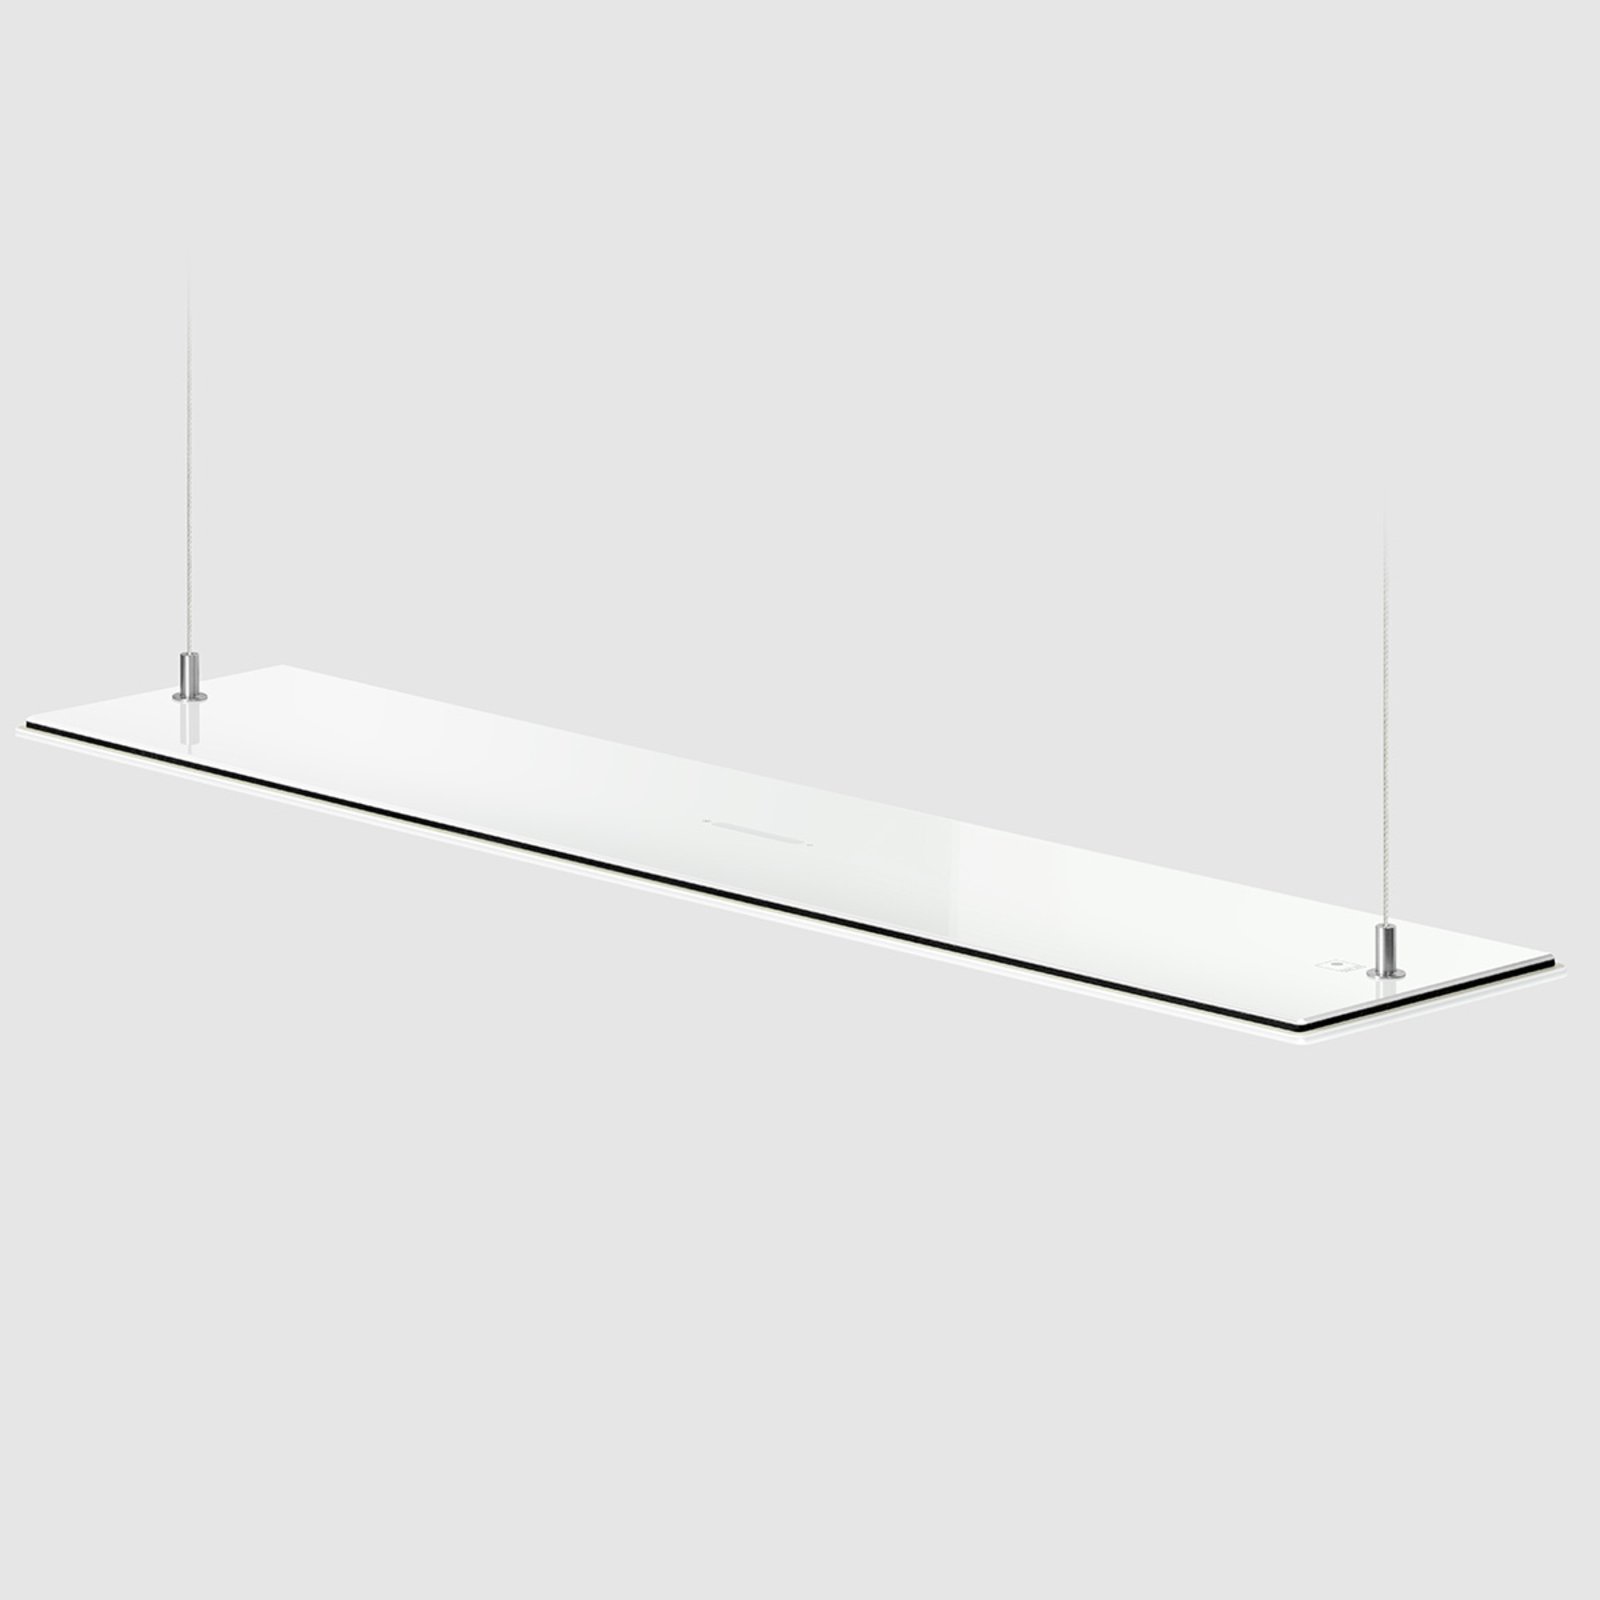 Suspension OLED blanche OMLED One s5